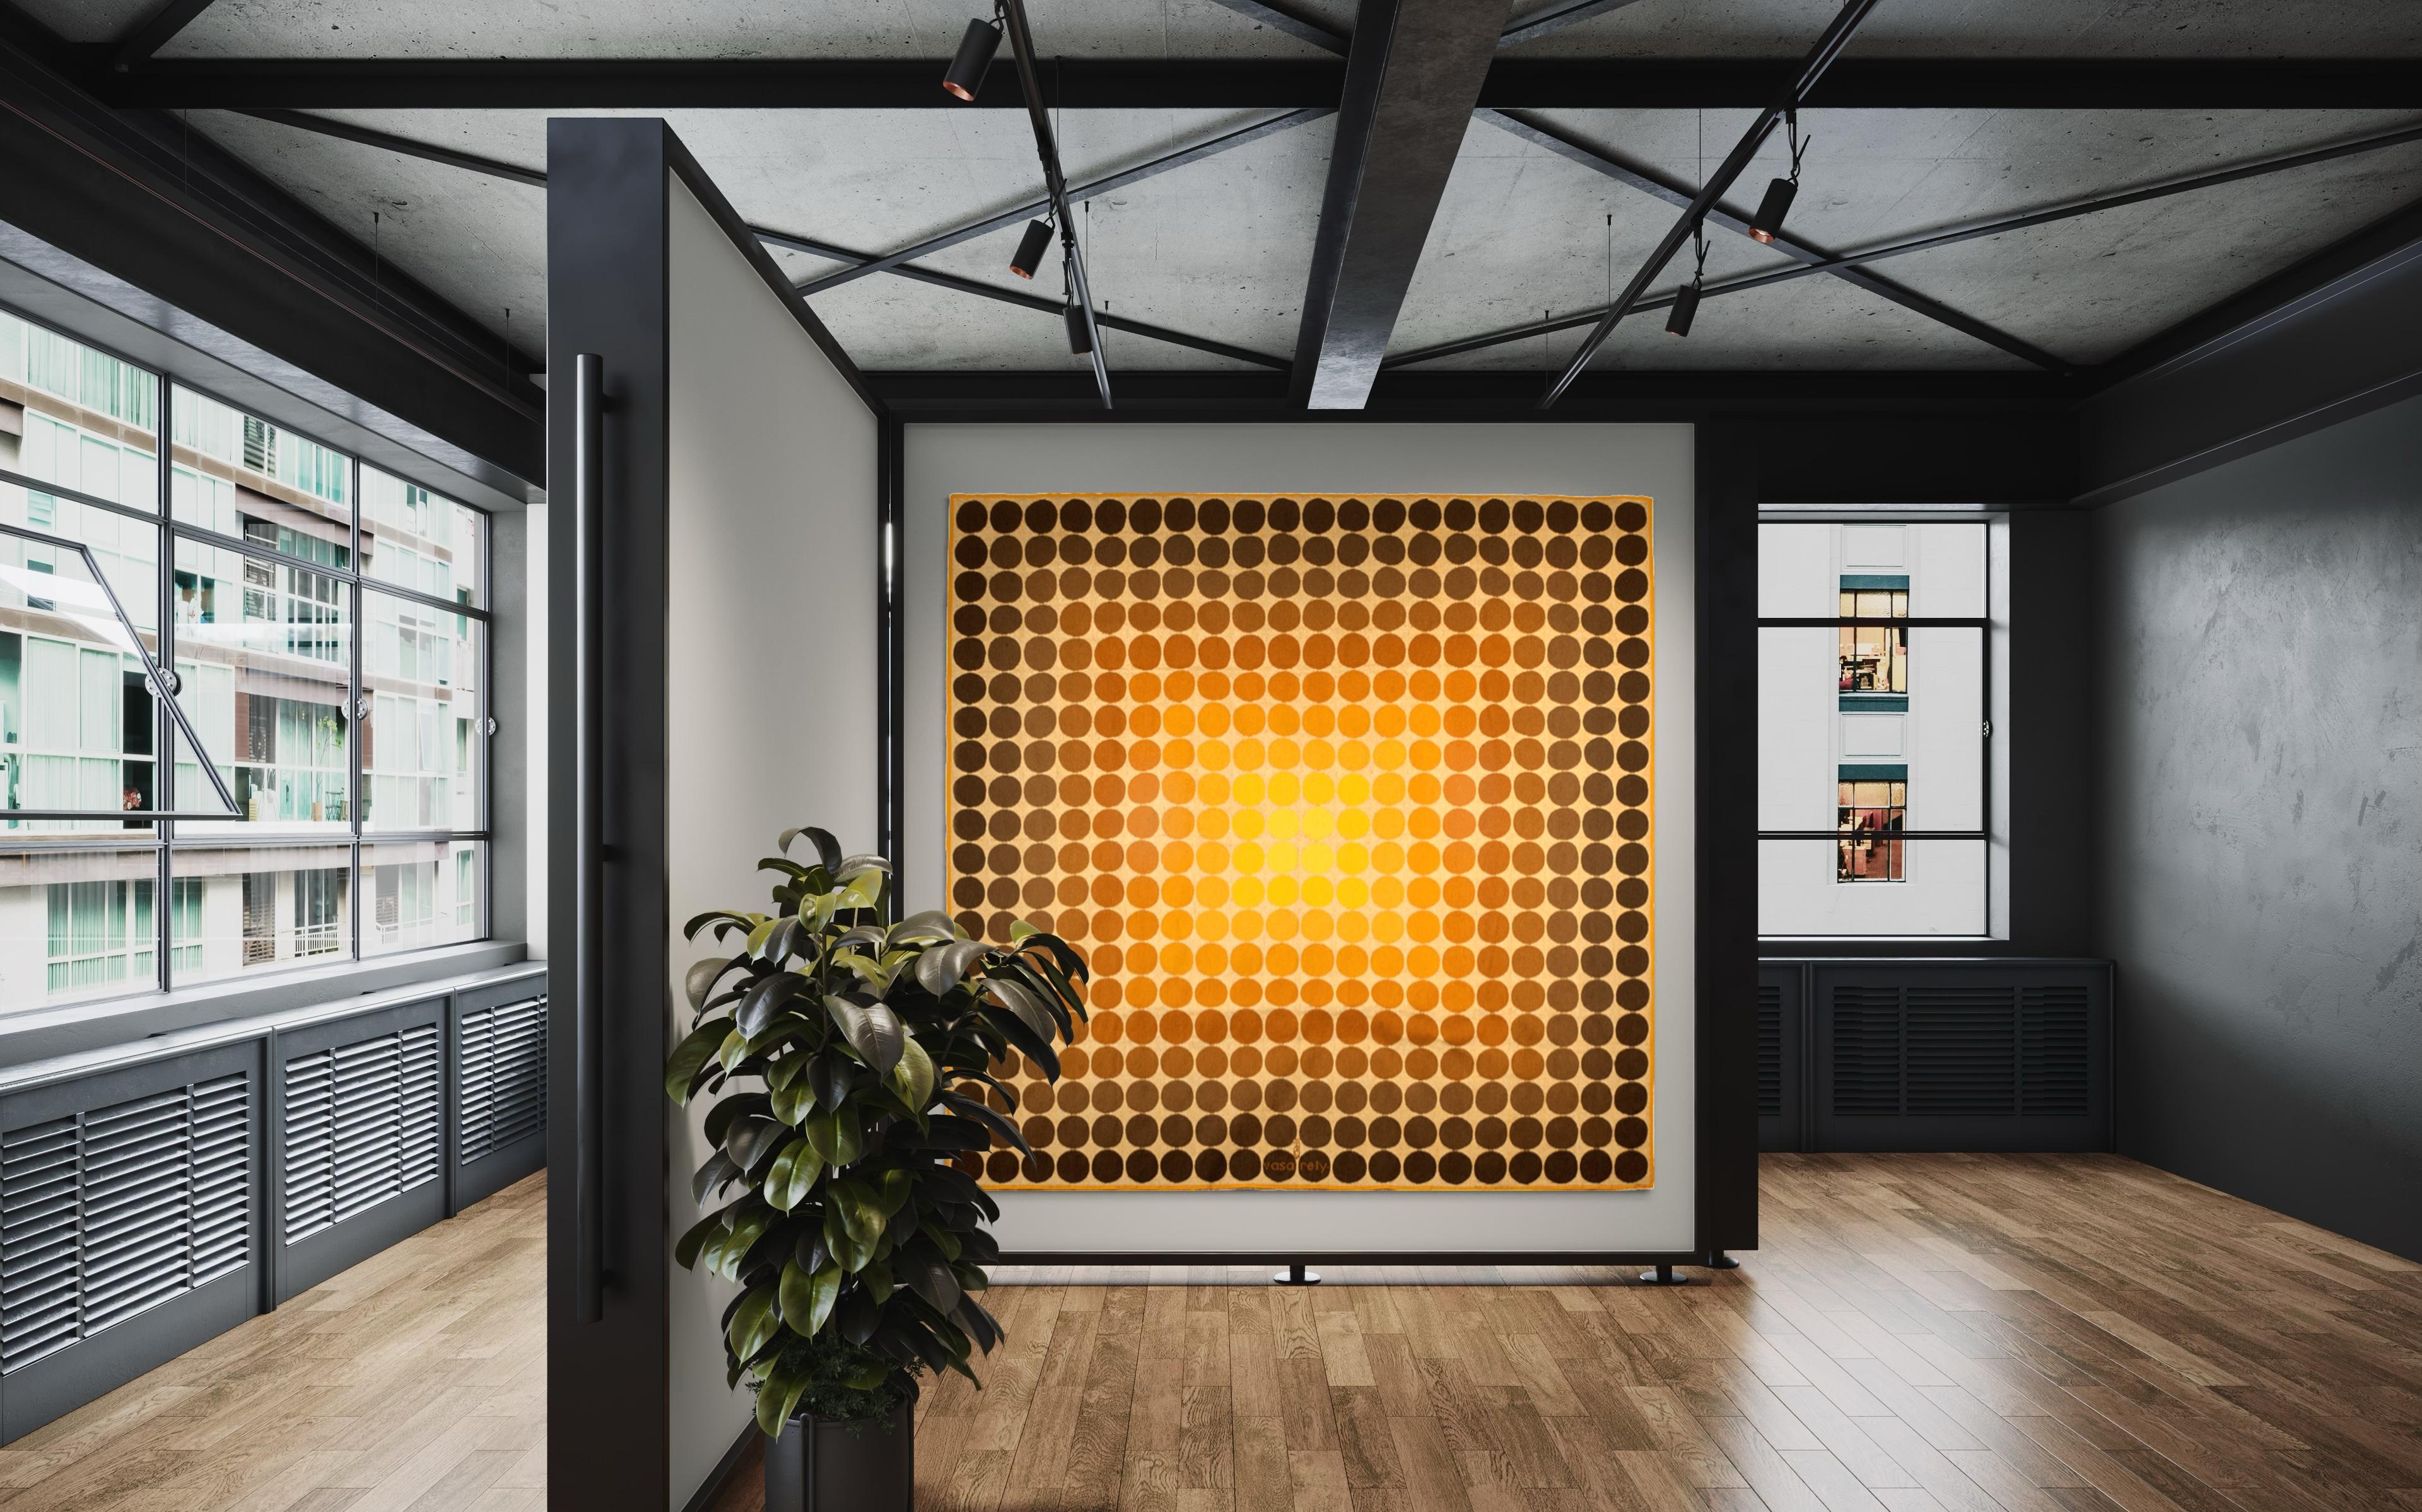 
Introducing a stunning Op-Art tapestry titled C.T.A 102, meticulously designed by the visionary artist Victor Vasarely (1908-1987) and expertly crafted at the esteemed Atelier Tabard Freres workshop in Aubusson, France, circa 1966. This remarkable